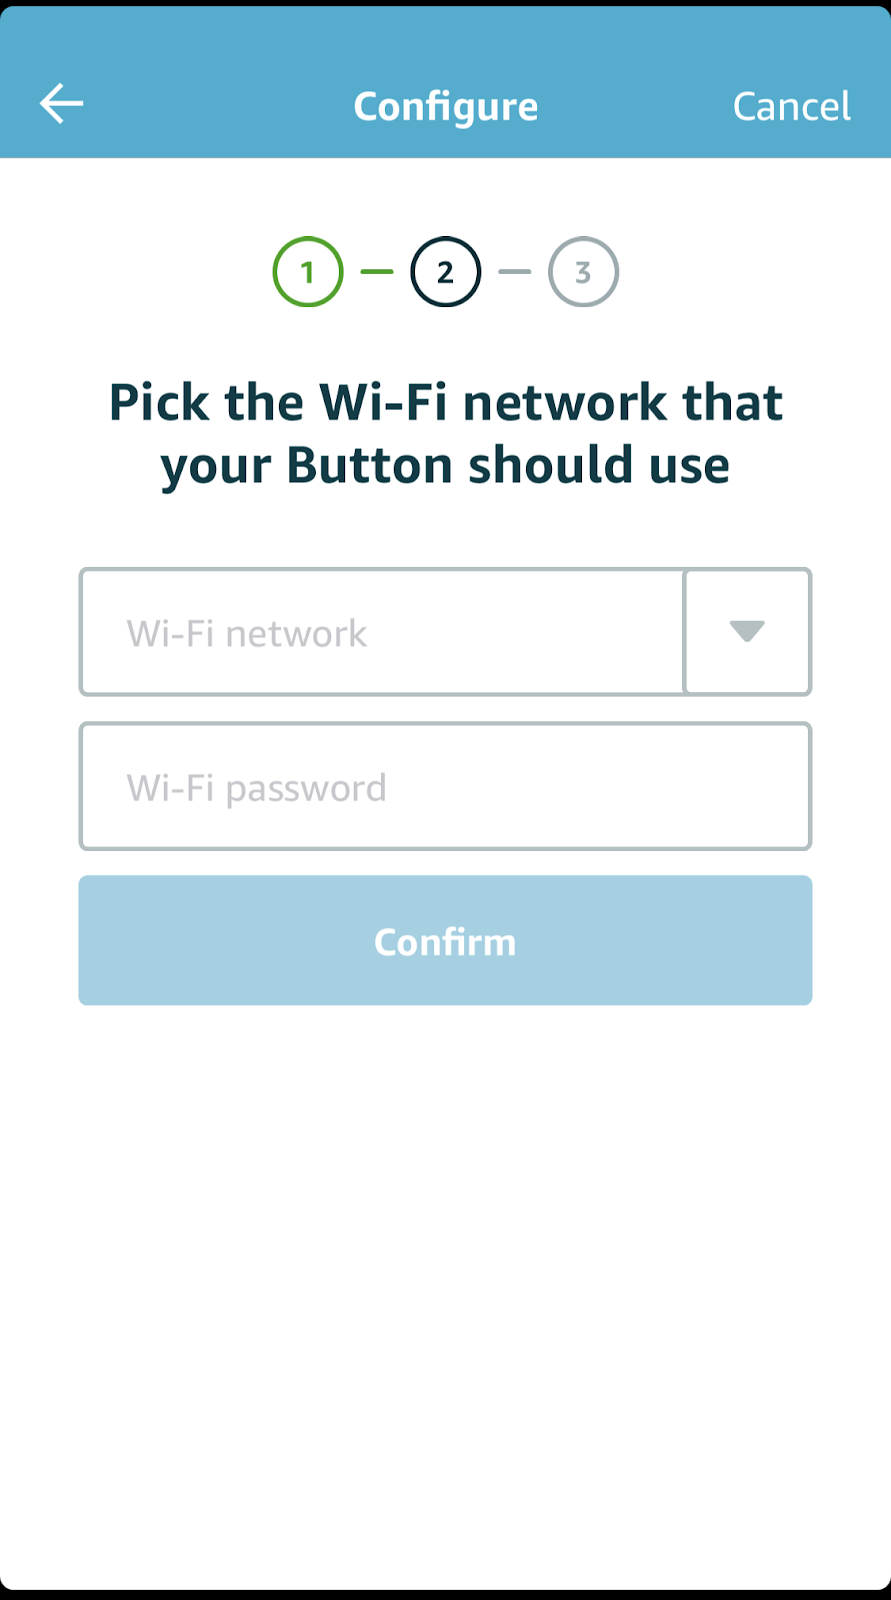 Configuring a WiFi network for the IoT button to use